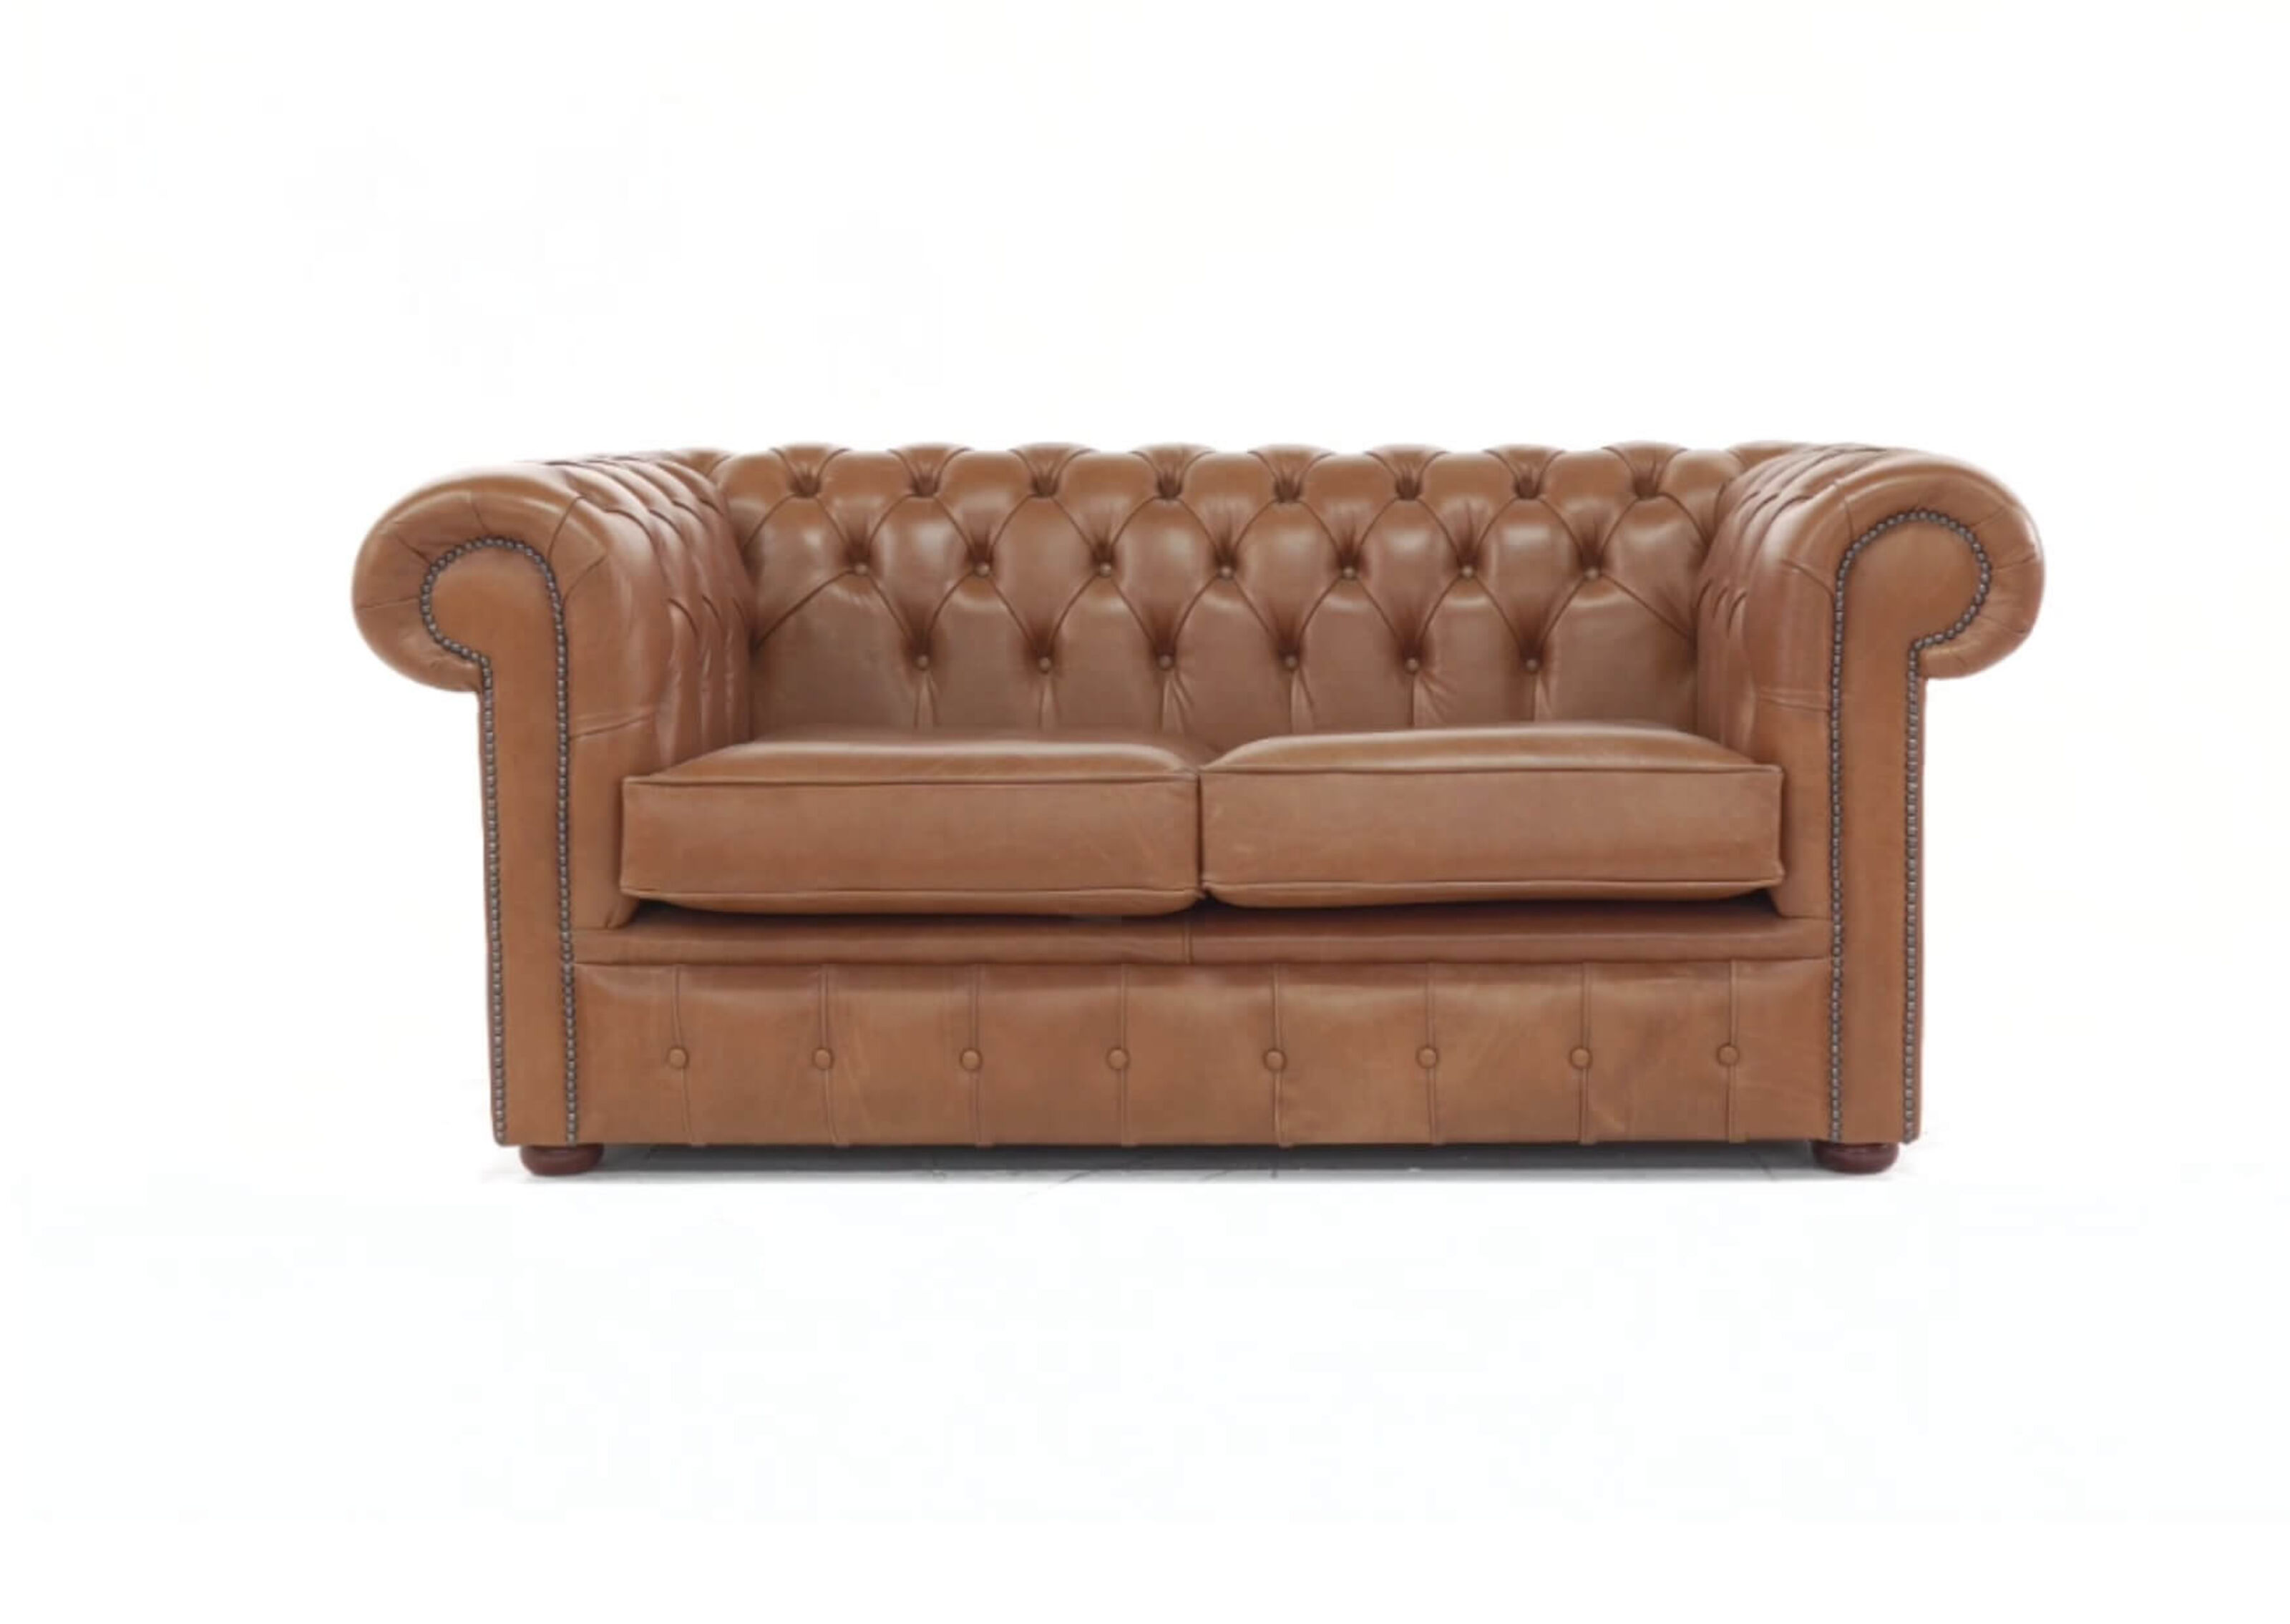 Crafting Timeless Comfort The Origin of Chesterfield Sofas Revealed  %Post Title